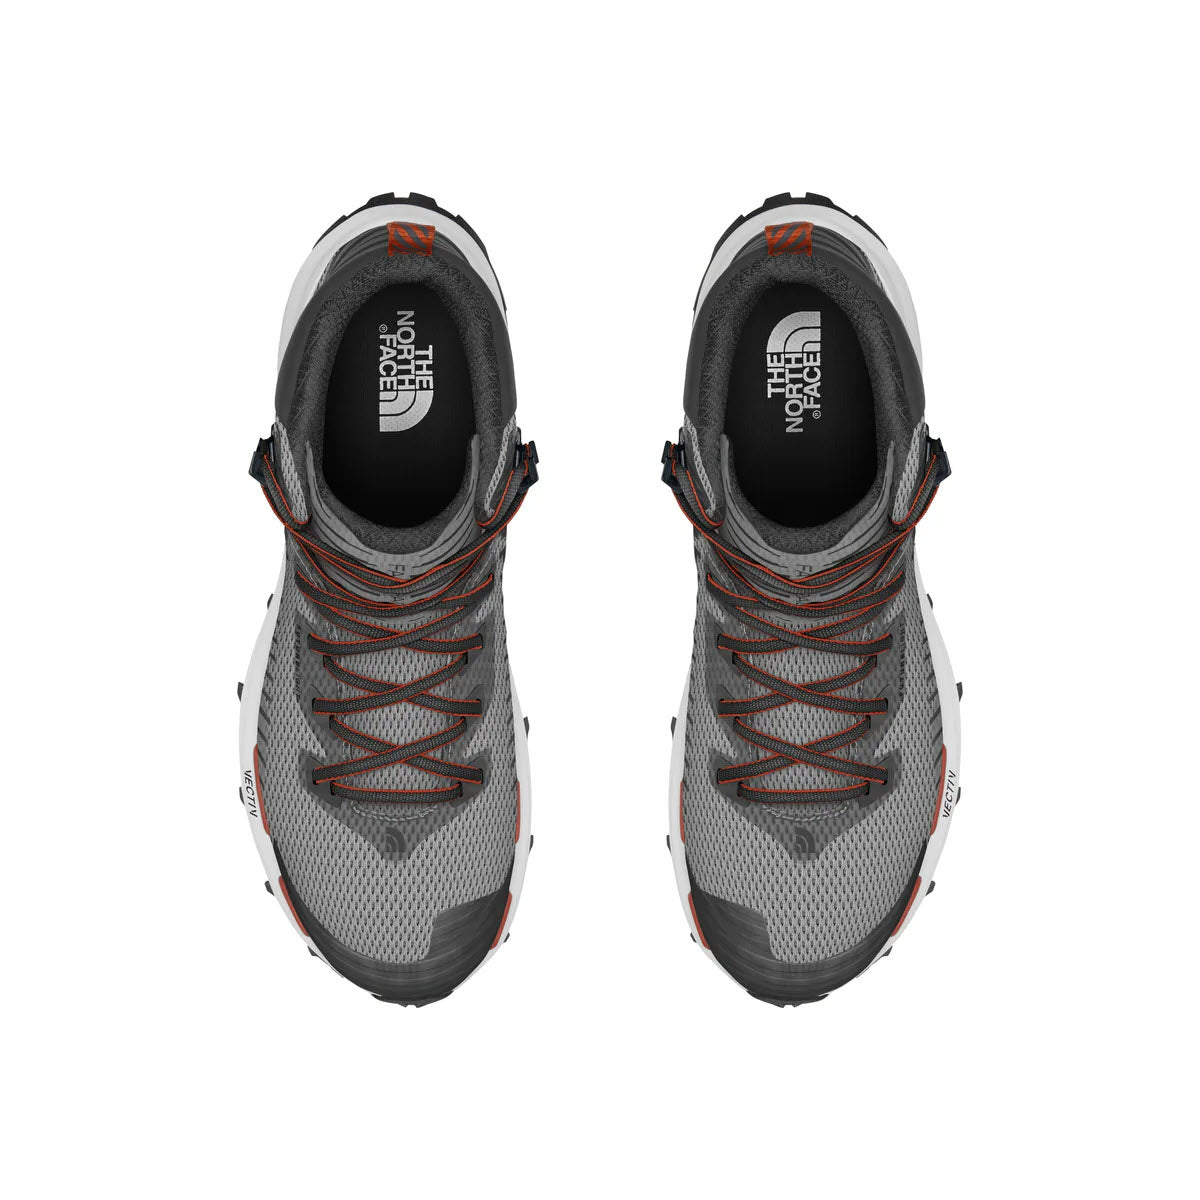 A pair of the North Face VECTIV Fastpack Mid Meld Grey hiking shoes viewed from above, featuring gray uppers with orange laces and black accents.